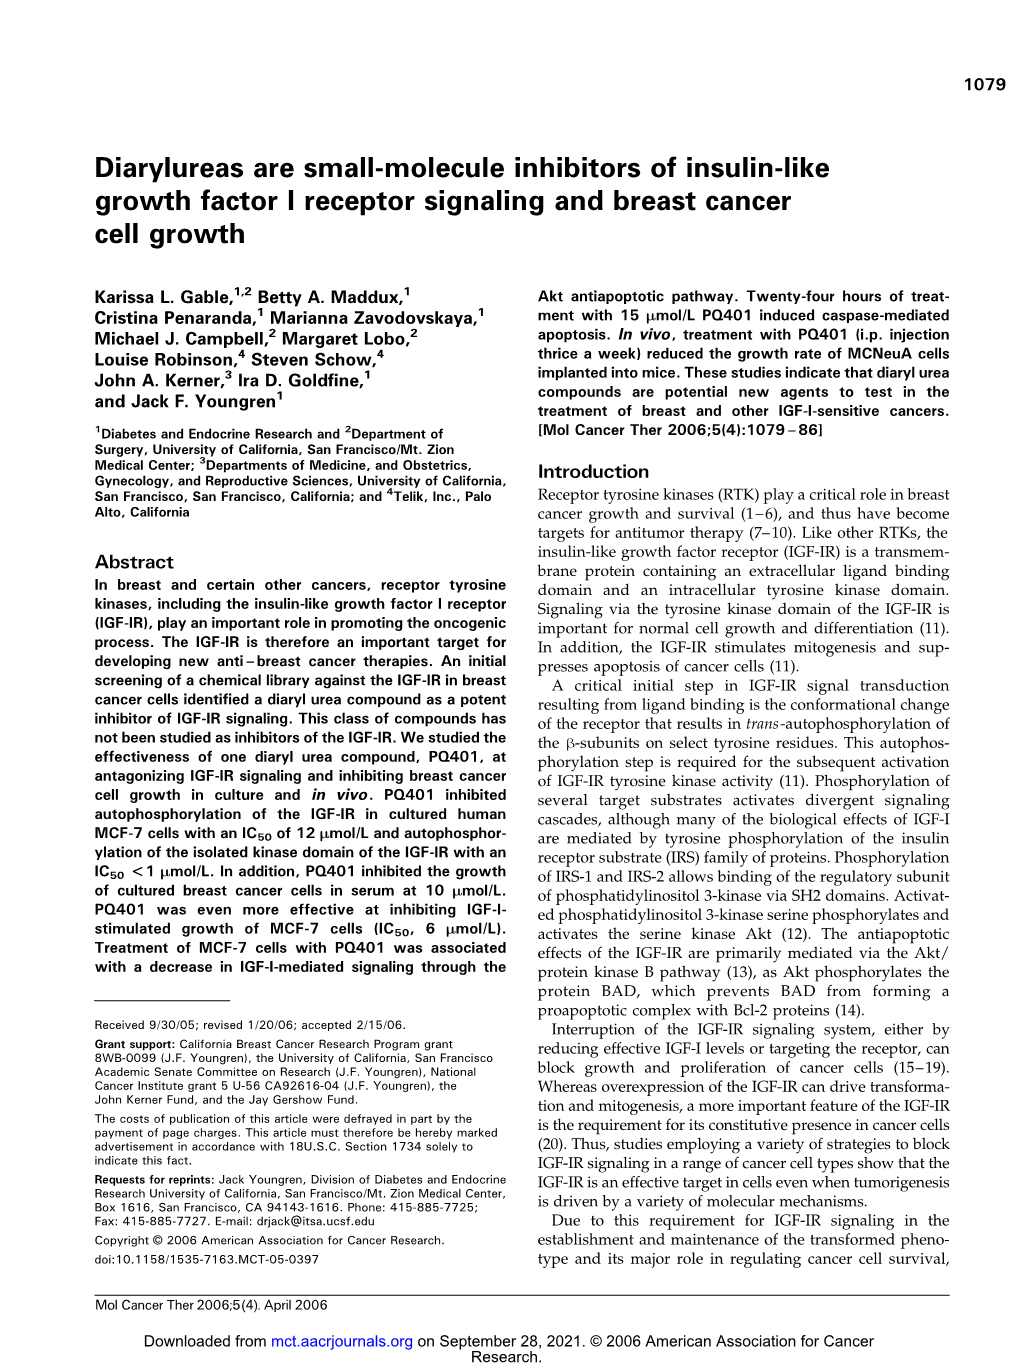 Diarylureas Are Small-Molecule Inhibitors of Insulin-Like Growth Factor I Receptor Signaling and Breast Cancer Cell Growth